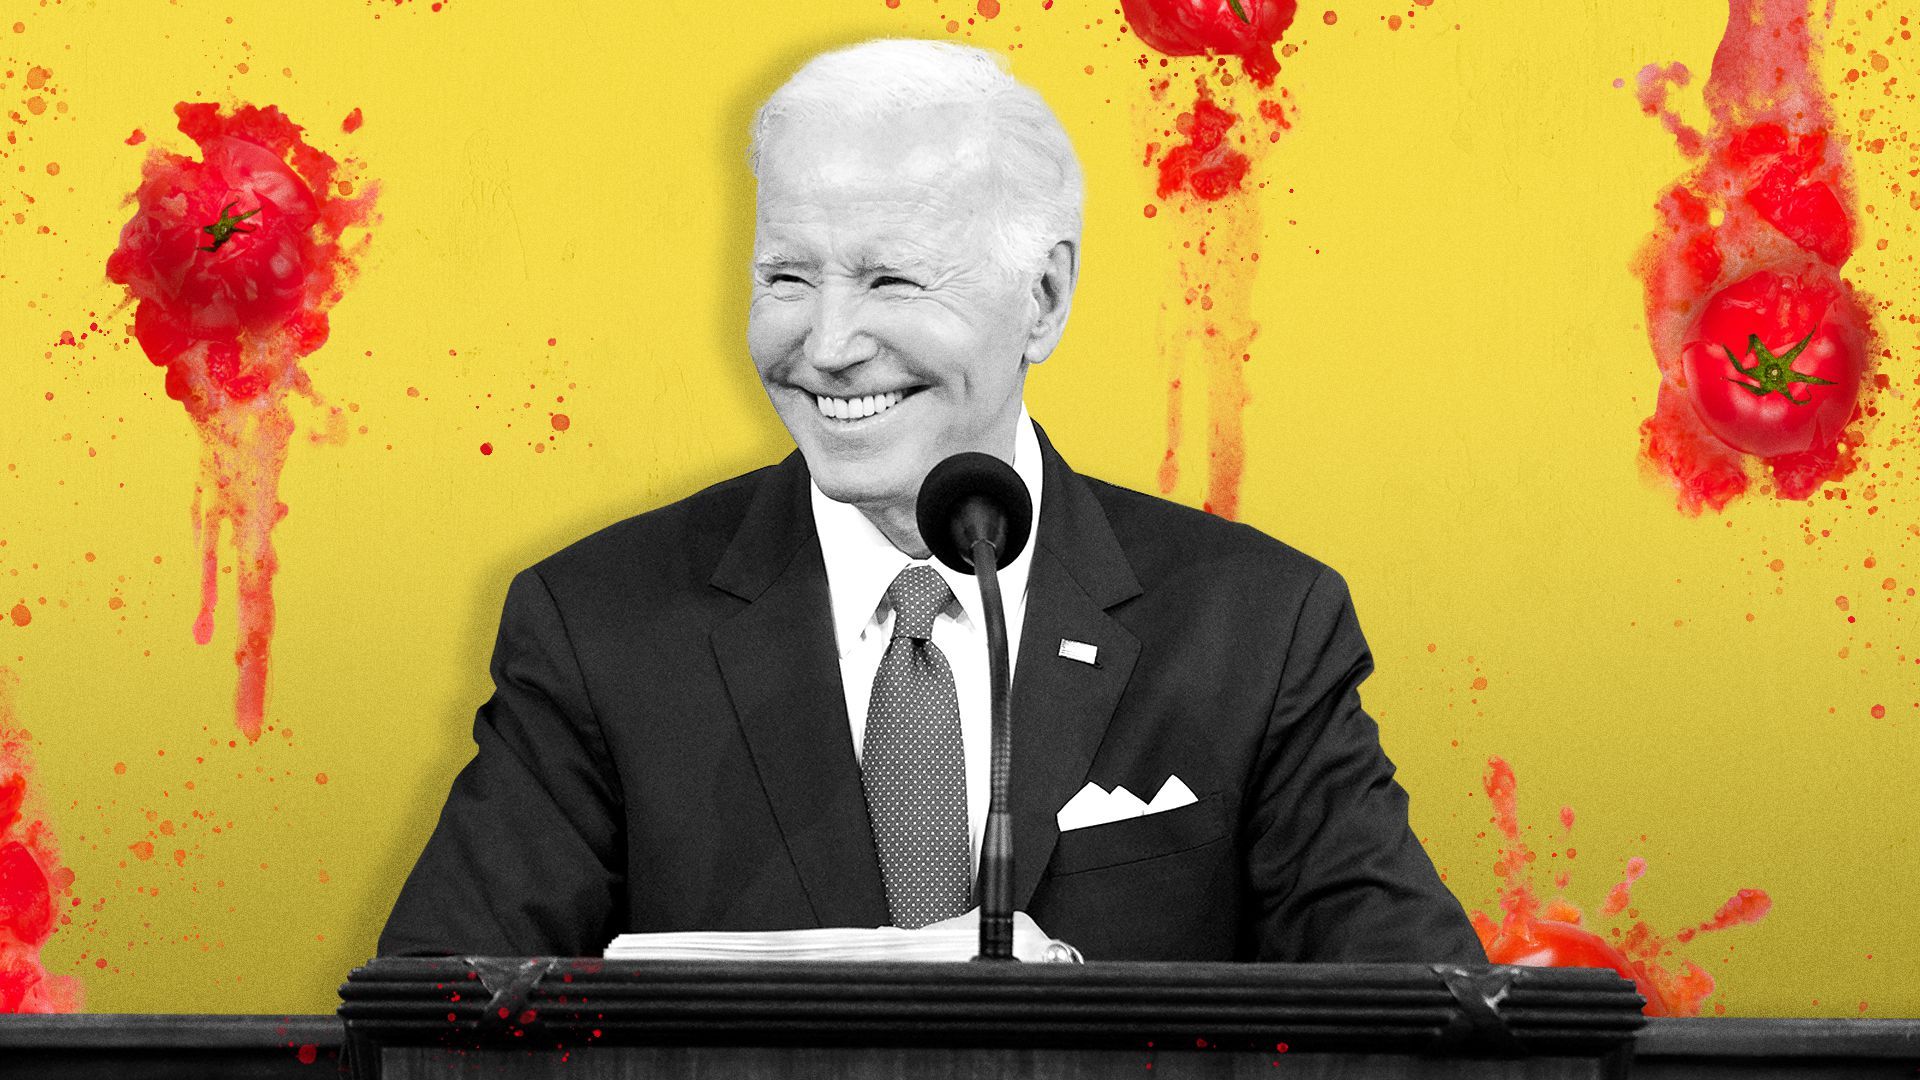 Photo illustration of President Biden smiling while rotten tomatoes slide down the wall behind him.